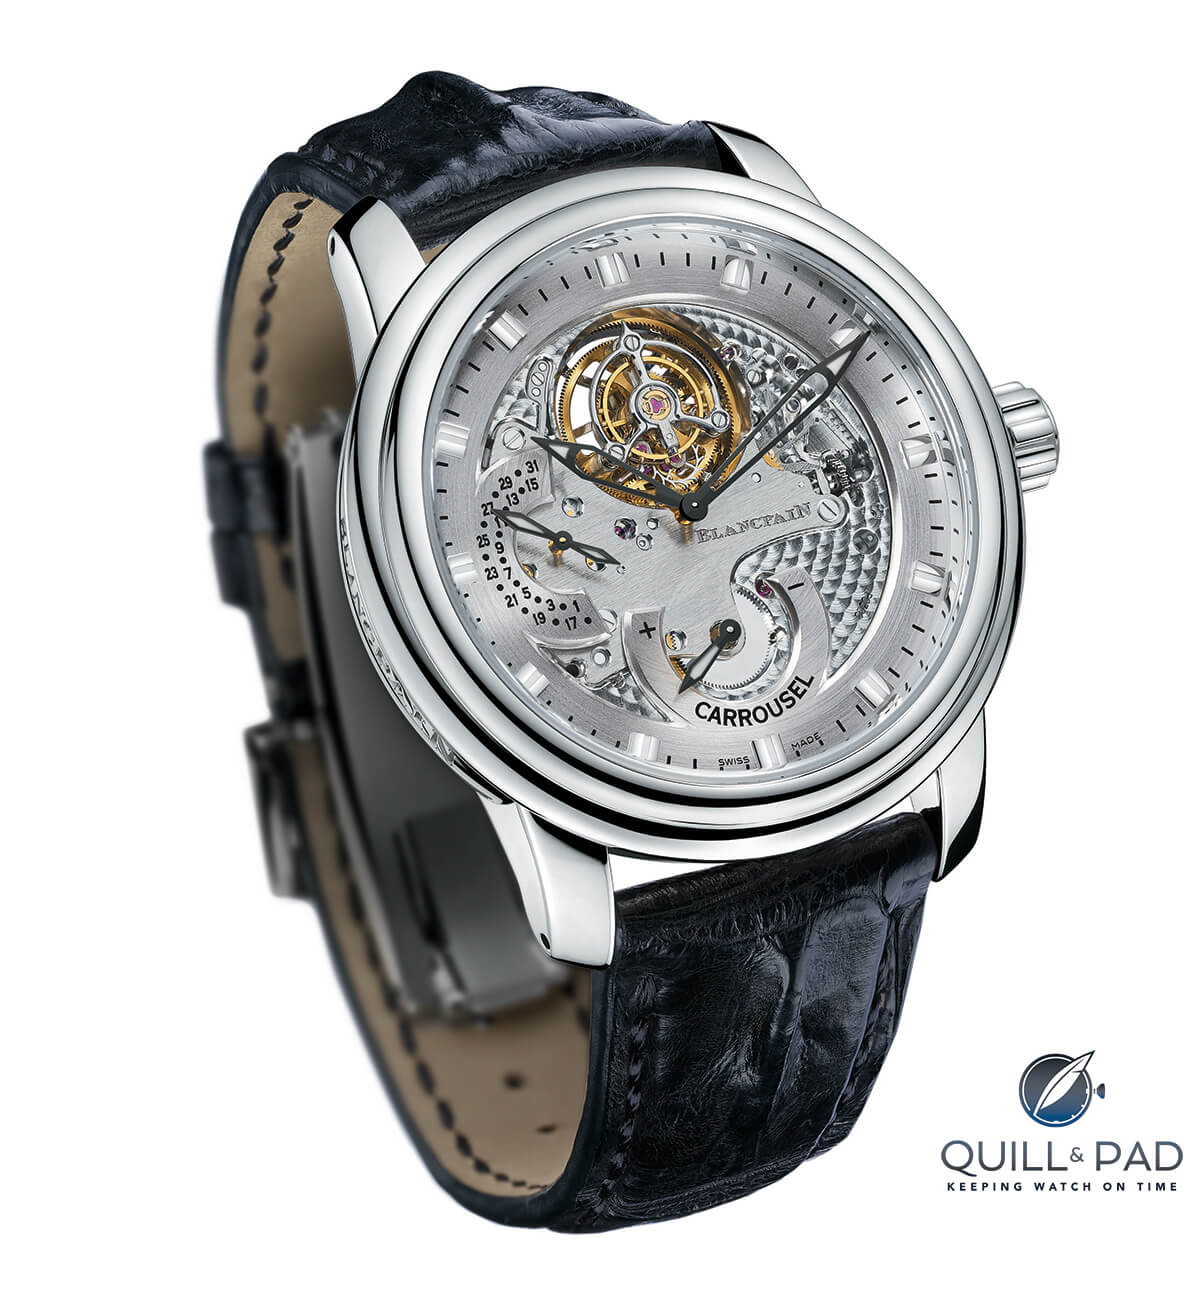 Blancpain Carrousel Volante Une Minute from 2008